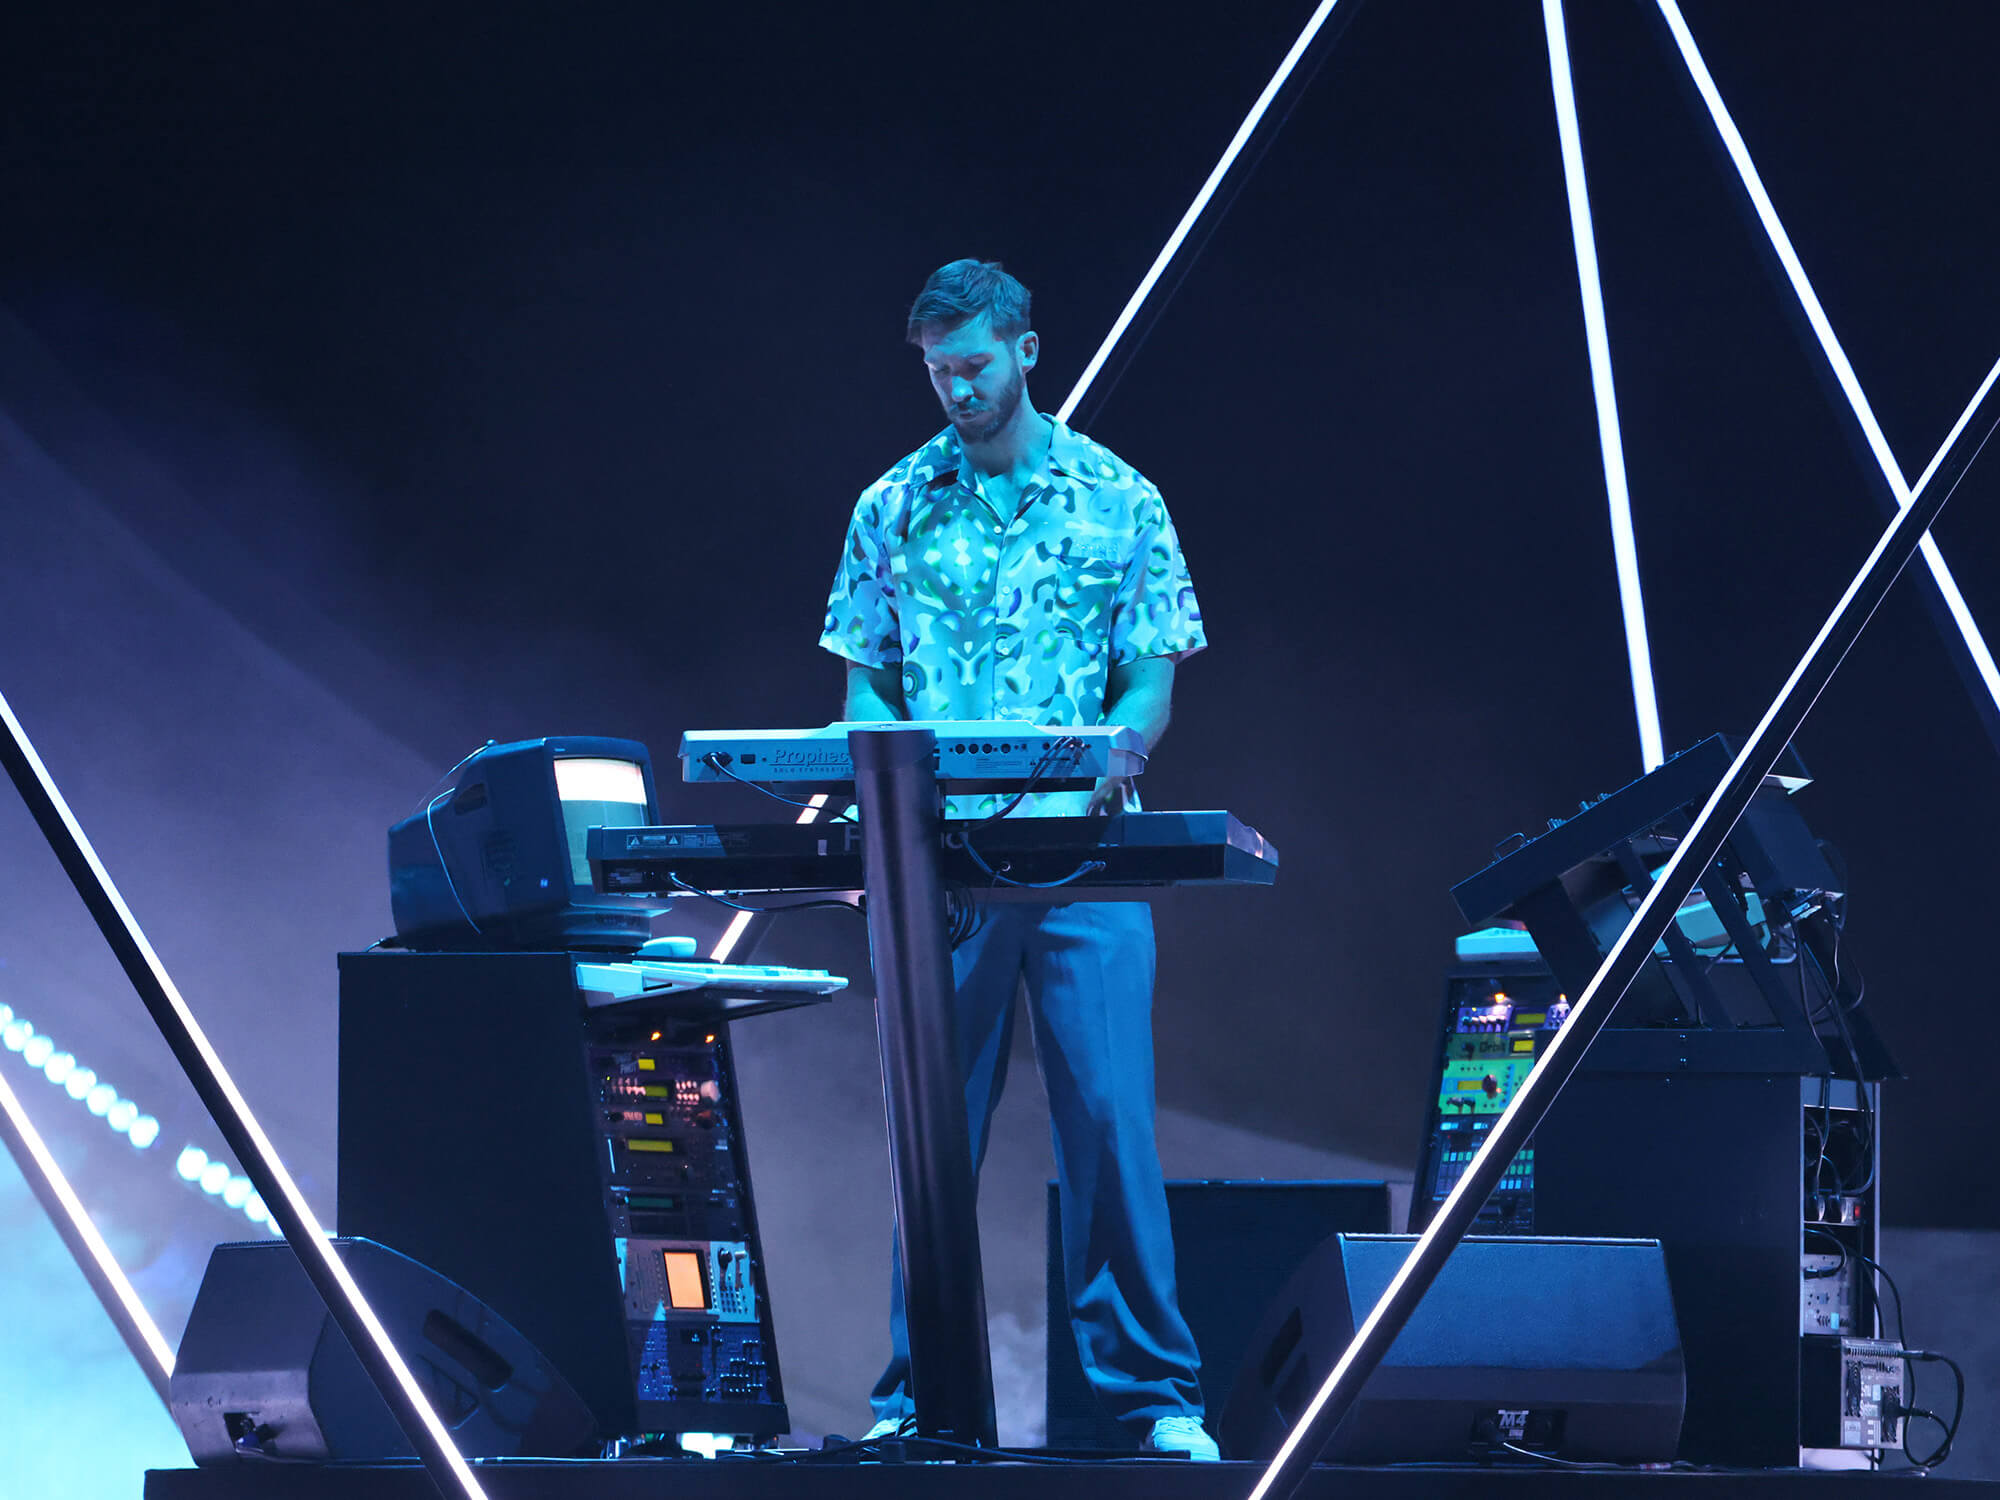 Calvin Harris on stage at the BRIT awards playing a keyboard